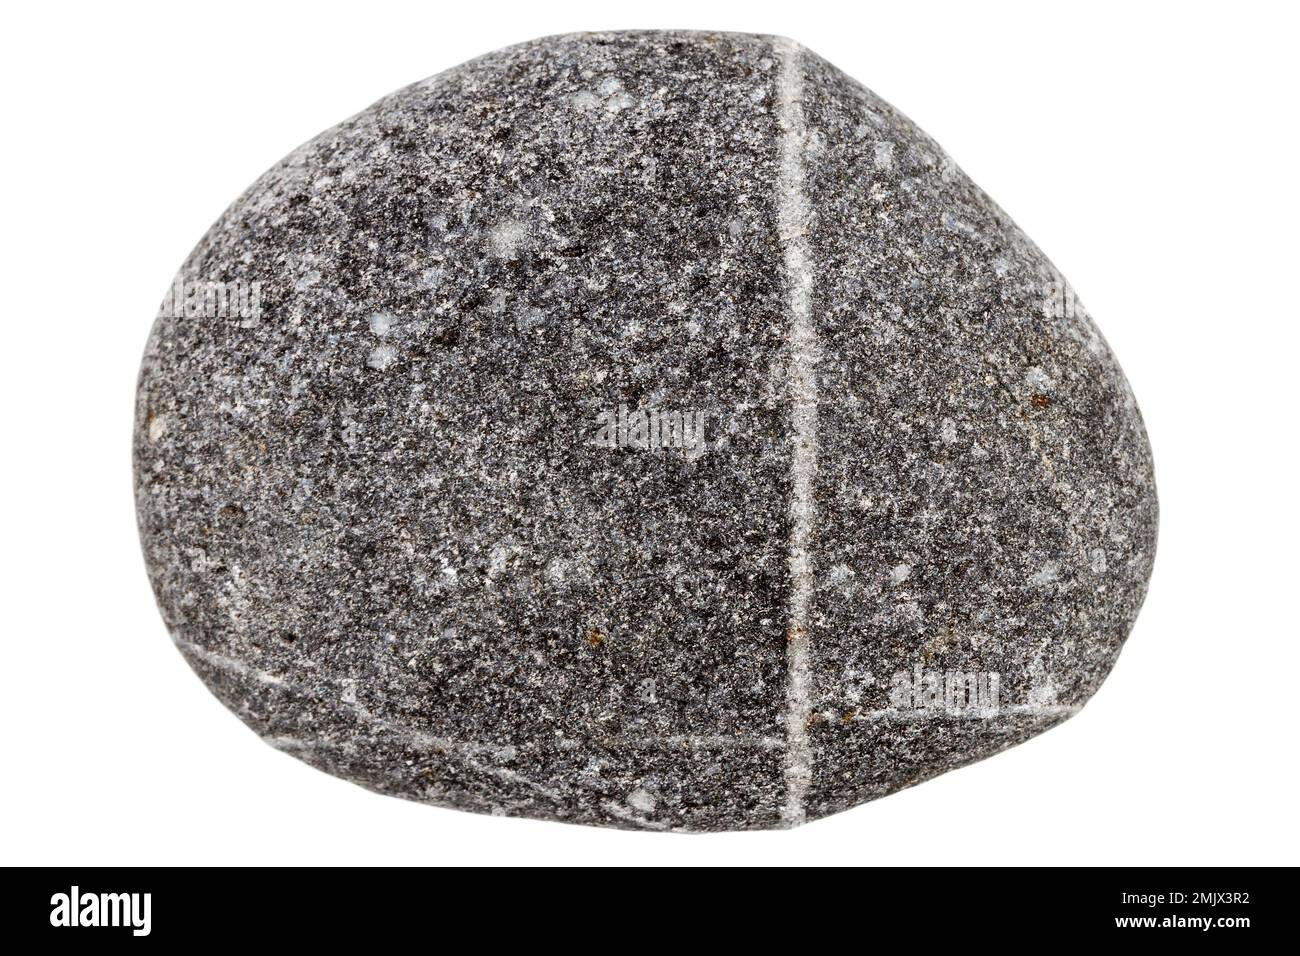 Top view of single black pebble isolated on white background. Stock Photo